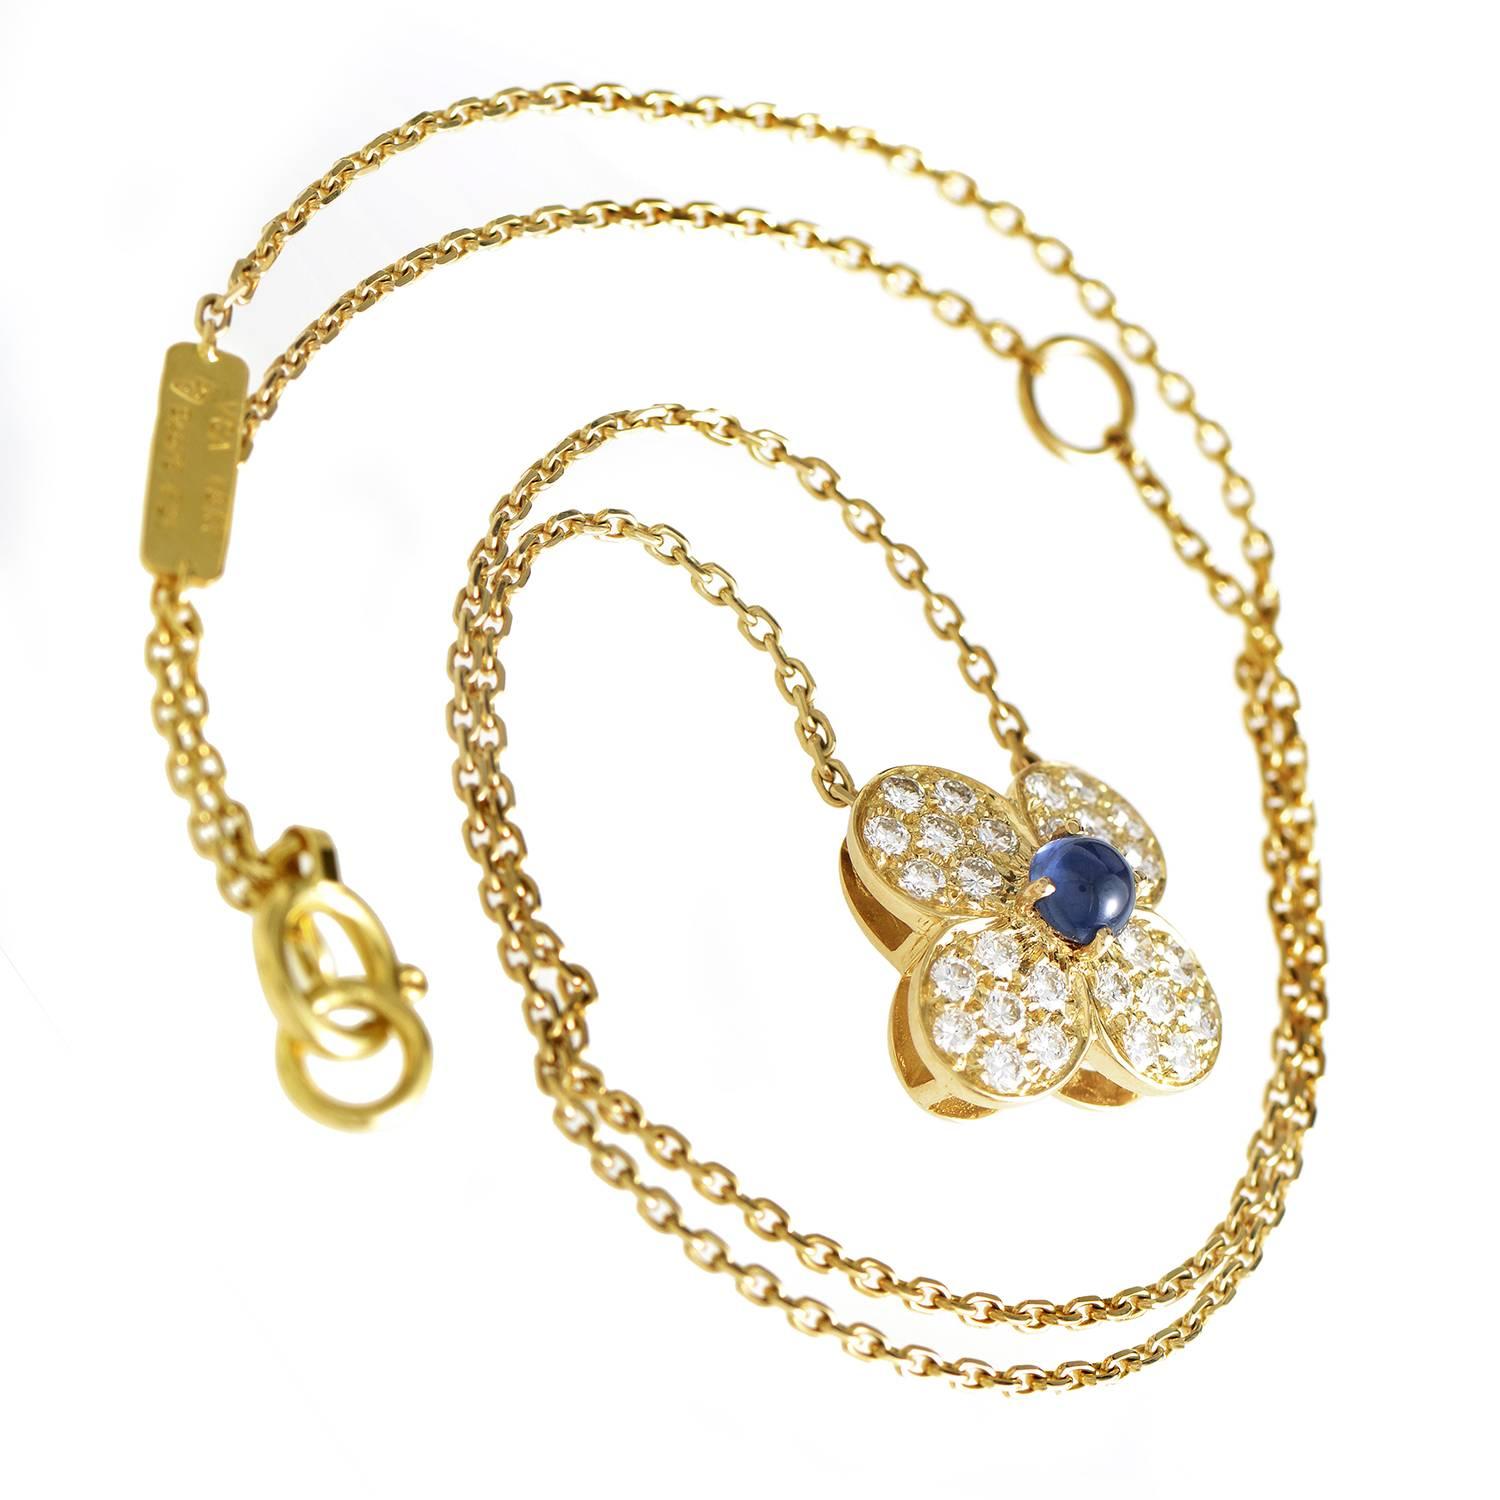 The regal combination of 18K yellow gold, diamonds and deep blue sapphire is charmingly brought together for a queenly necklace in this Van Cleef & Arpels flower pendant necklace. The delicate 18K yellow gold rolo chain holds the pave set petals of